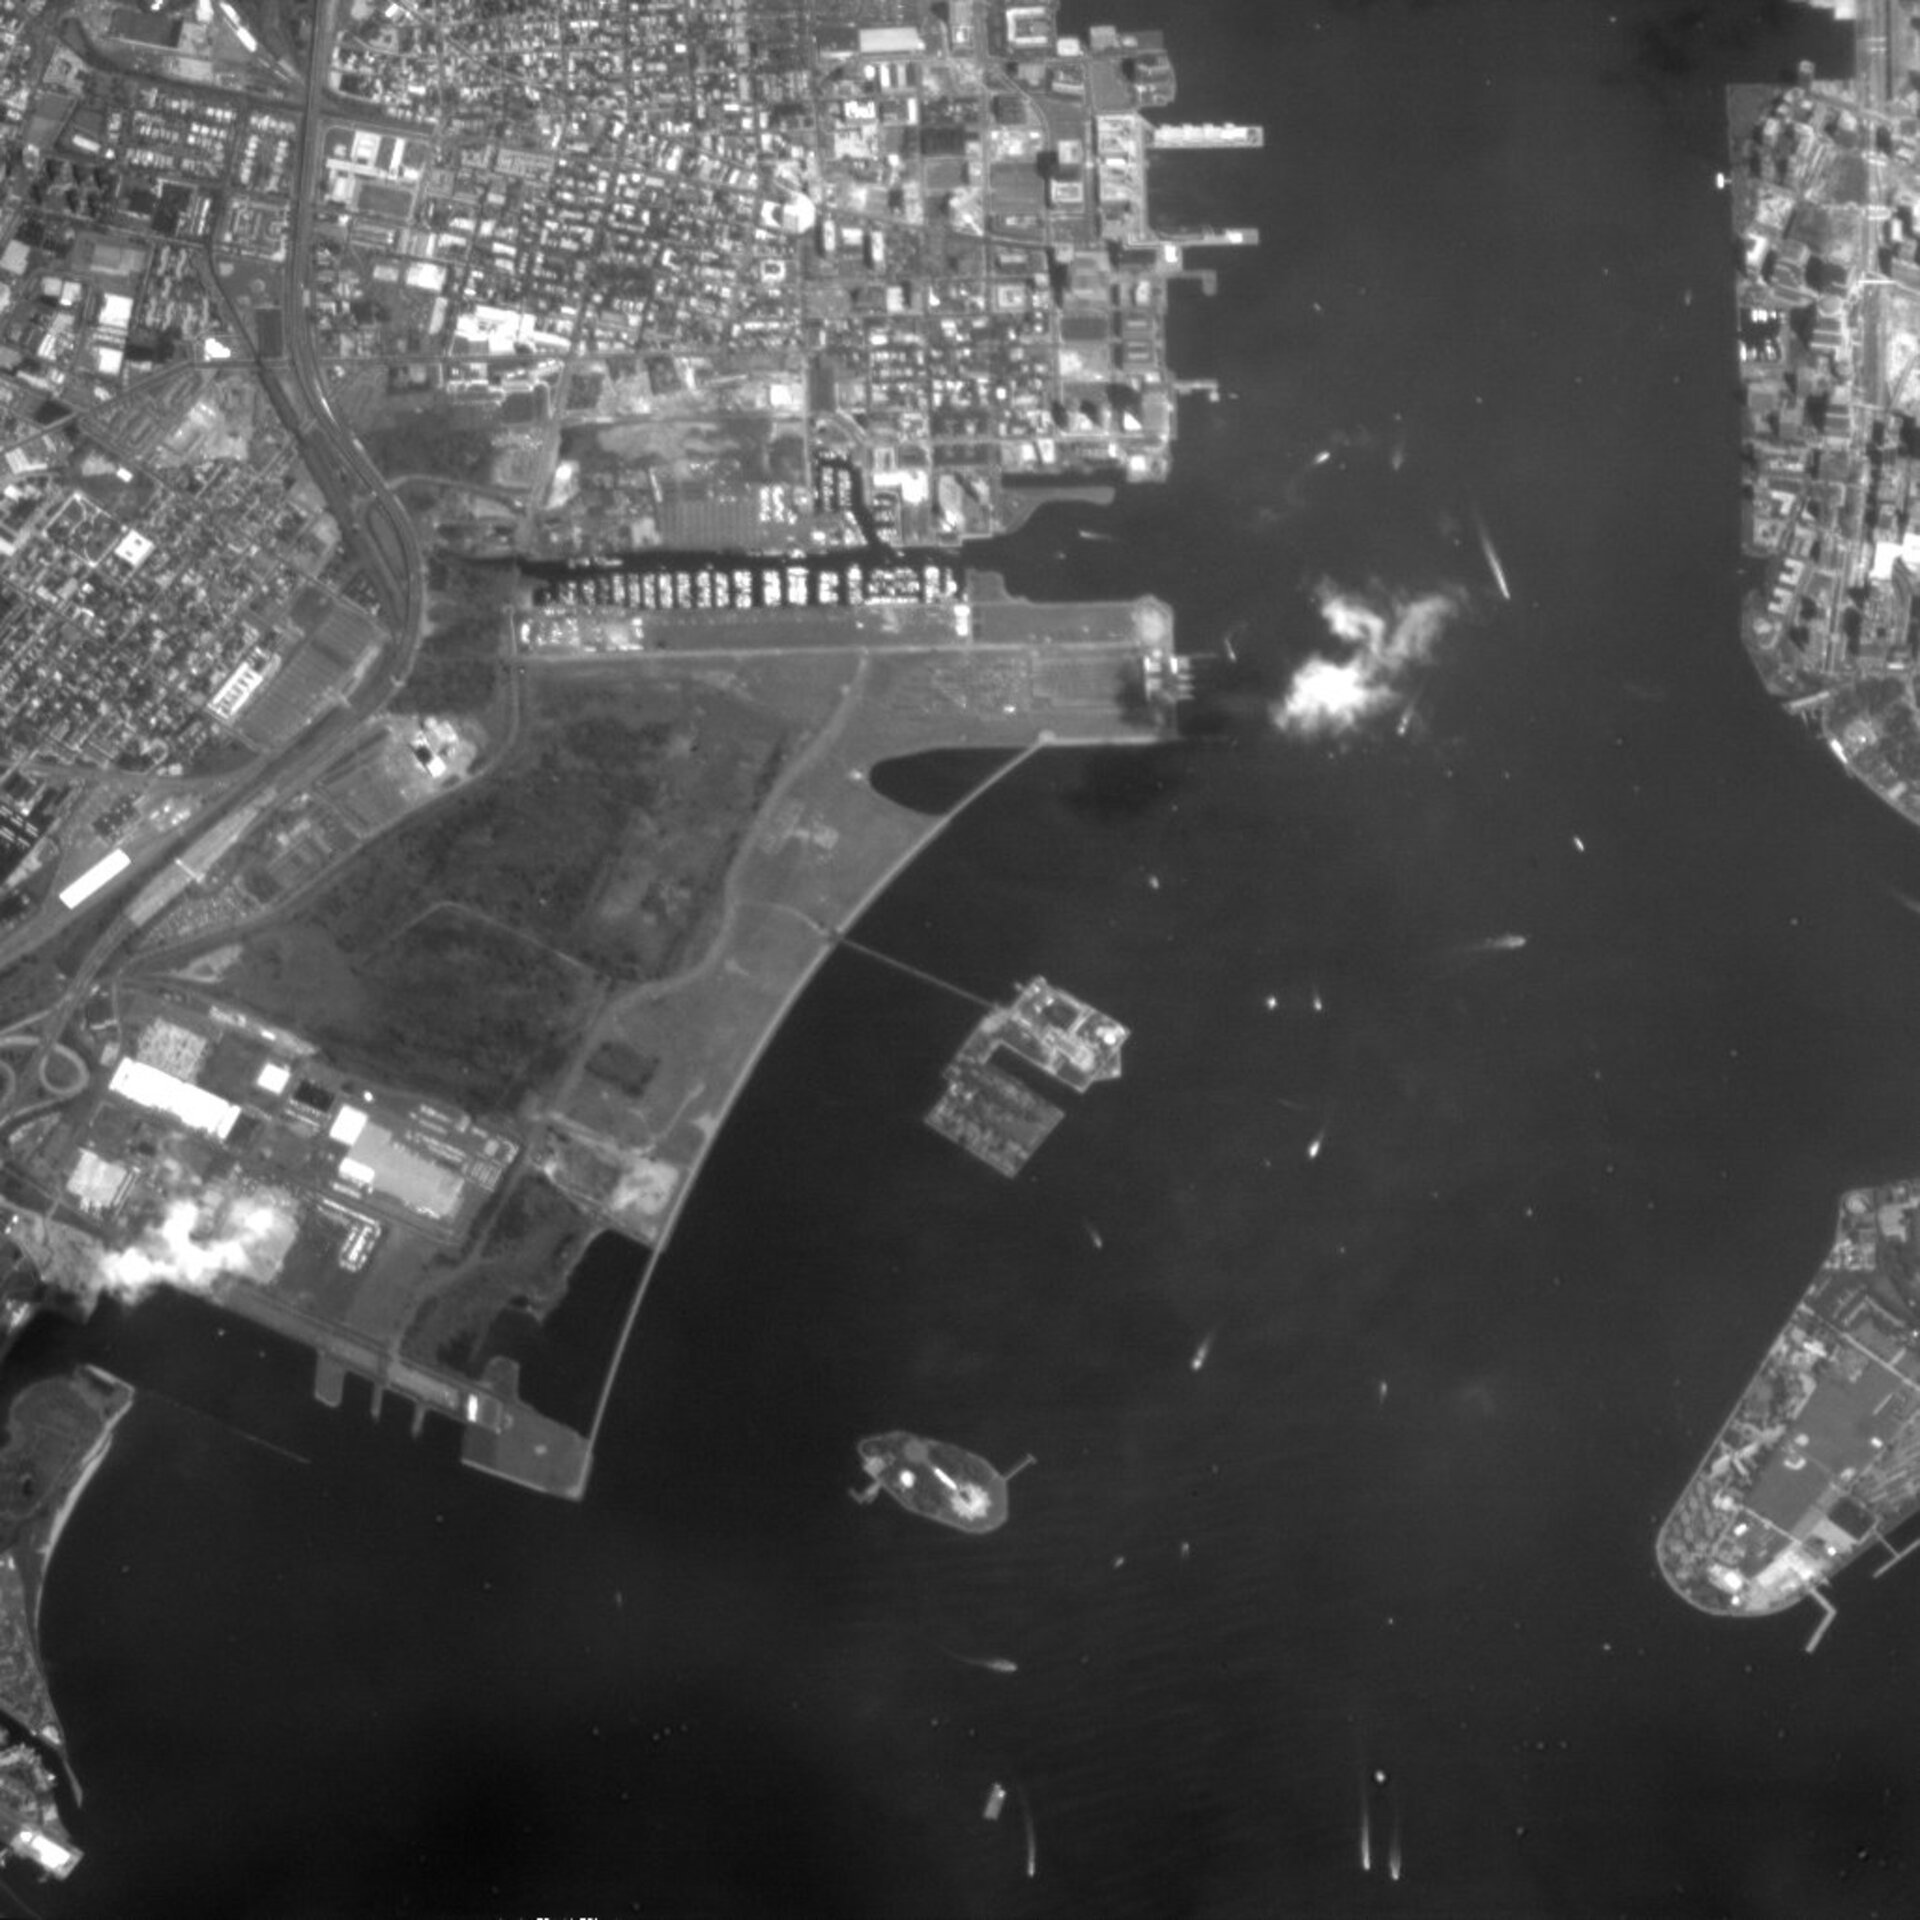 Proba image of Liberty Island and Ellis Island in the New York Harbour